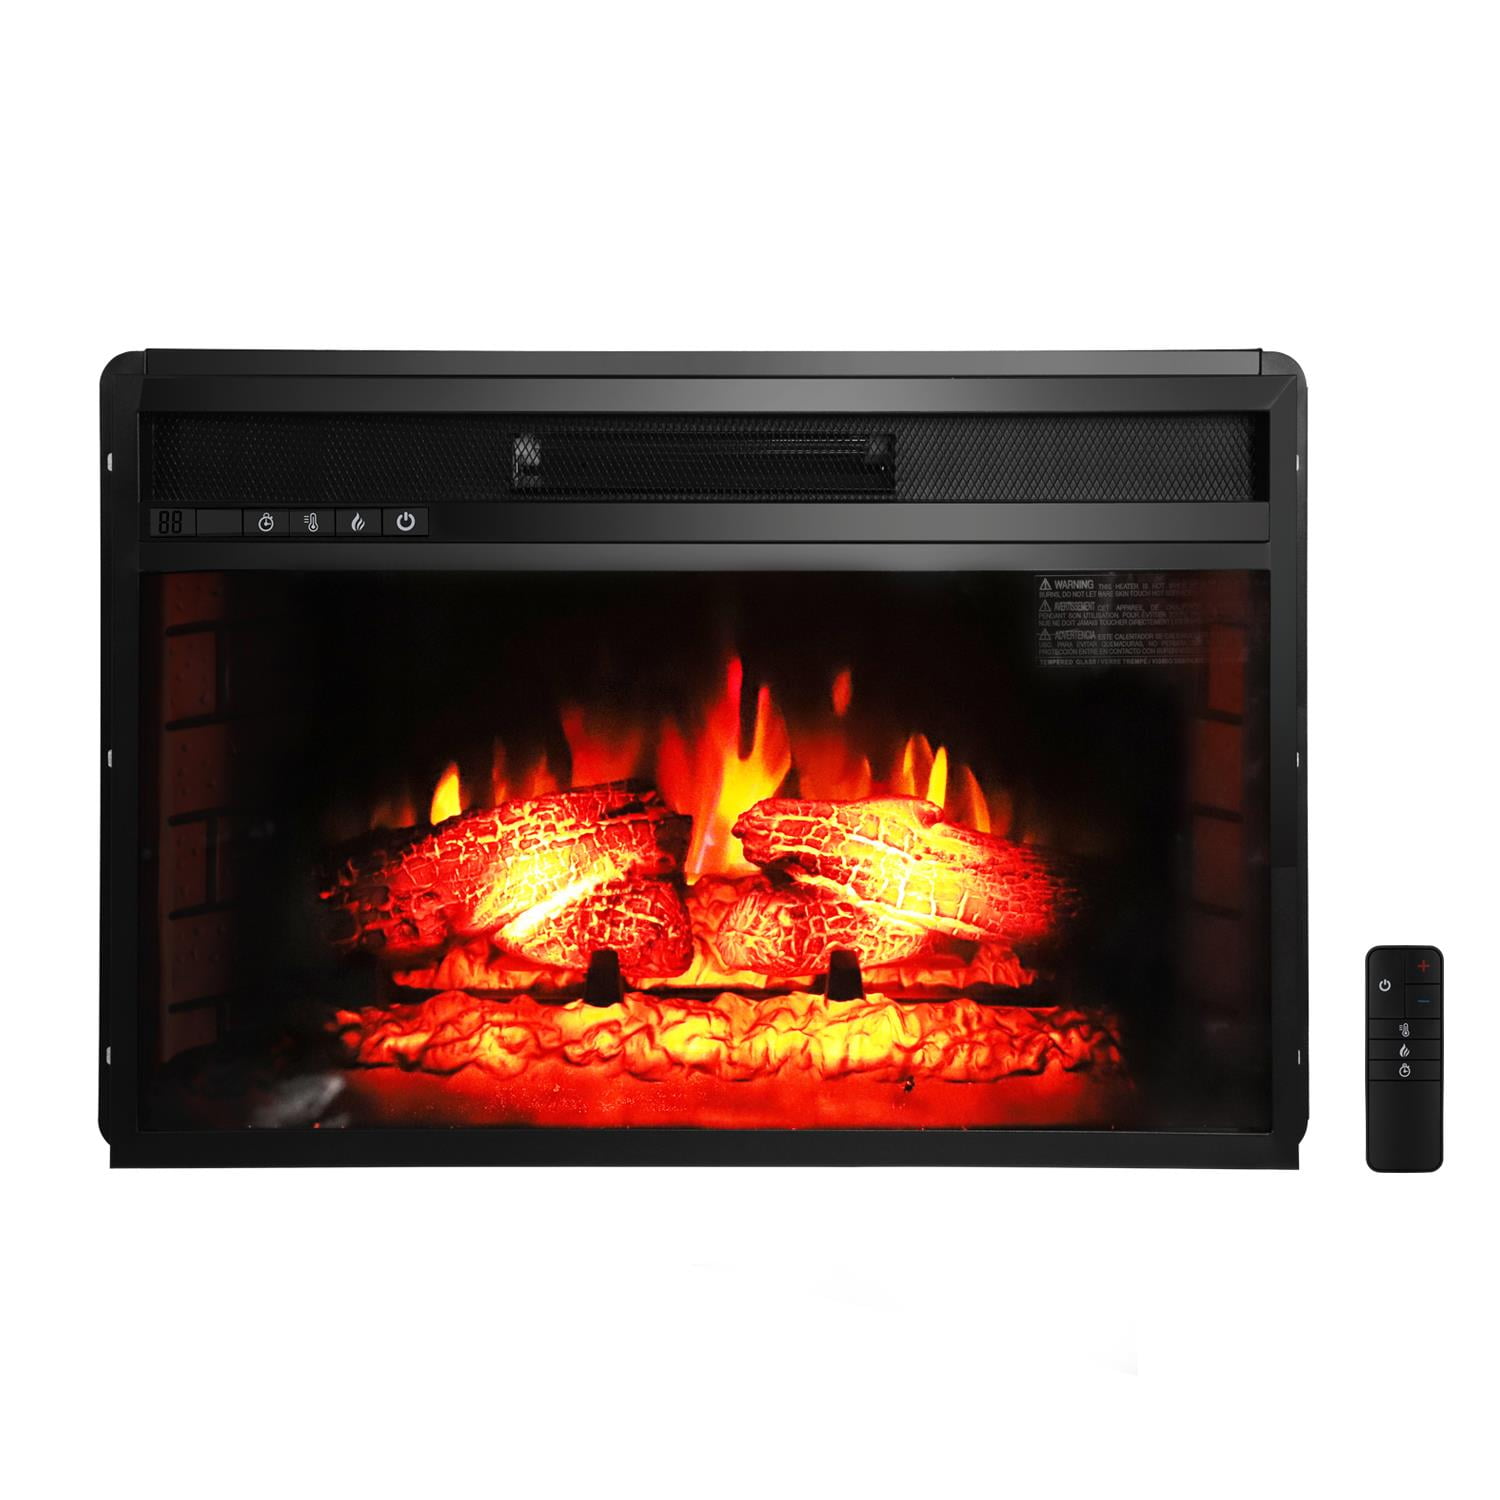 1X Large 1500W Adjustable Electric Wall Mount Fireplace Heater Remote Control 